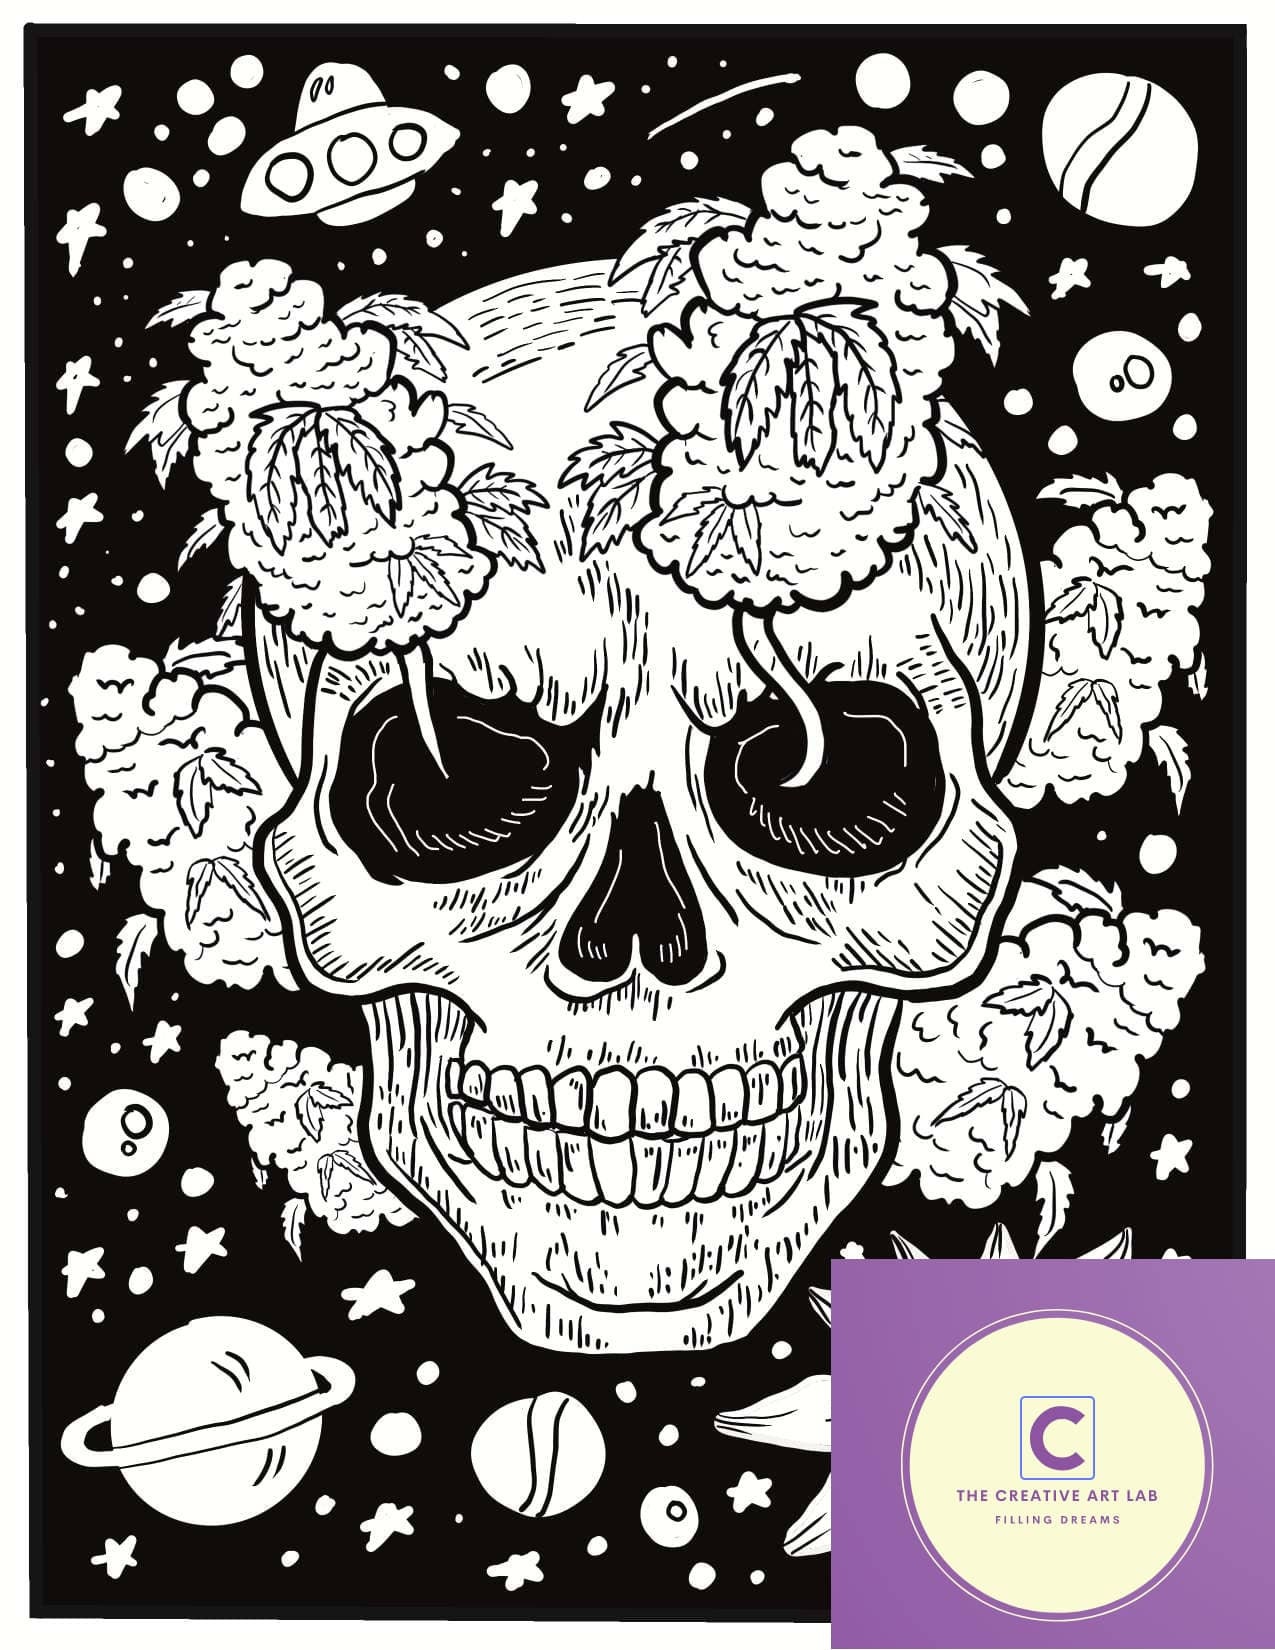 PSYCHEDELIC COLORING PAGES ADULTS 8.625x11.25 bleed: Stoner Coloring Book  With 50 Cool Images, Adults coloring pages for Relaxation, stoner gifts for  (Paperback)